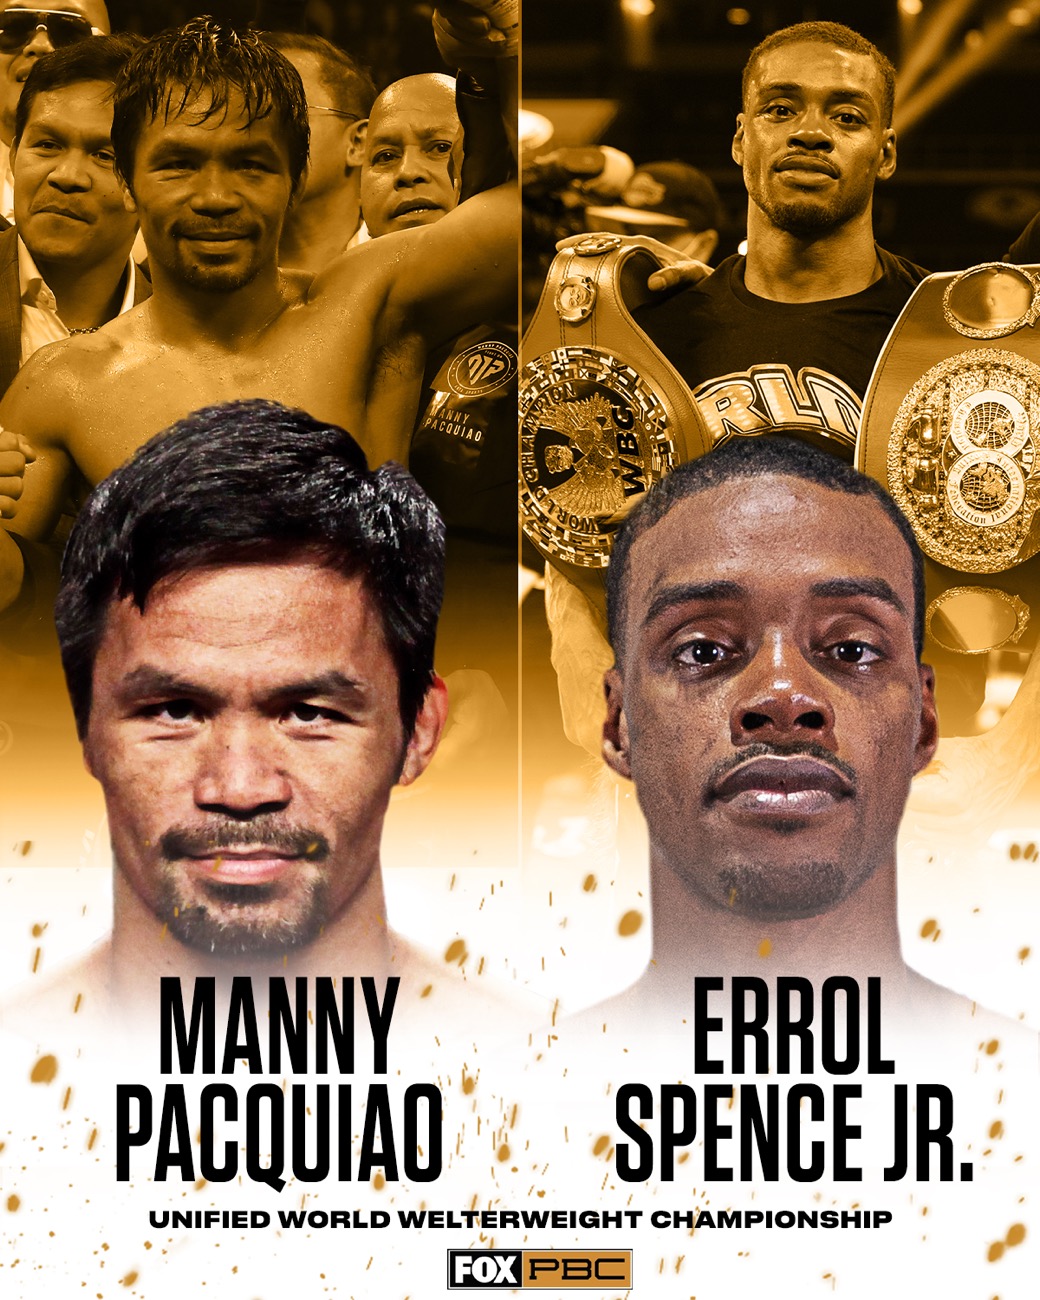 Andre Ward, Errol Spence Jr., Manny Pacquiao boxing image / photo